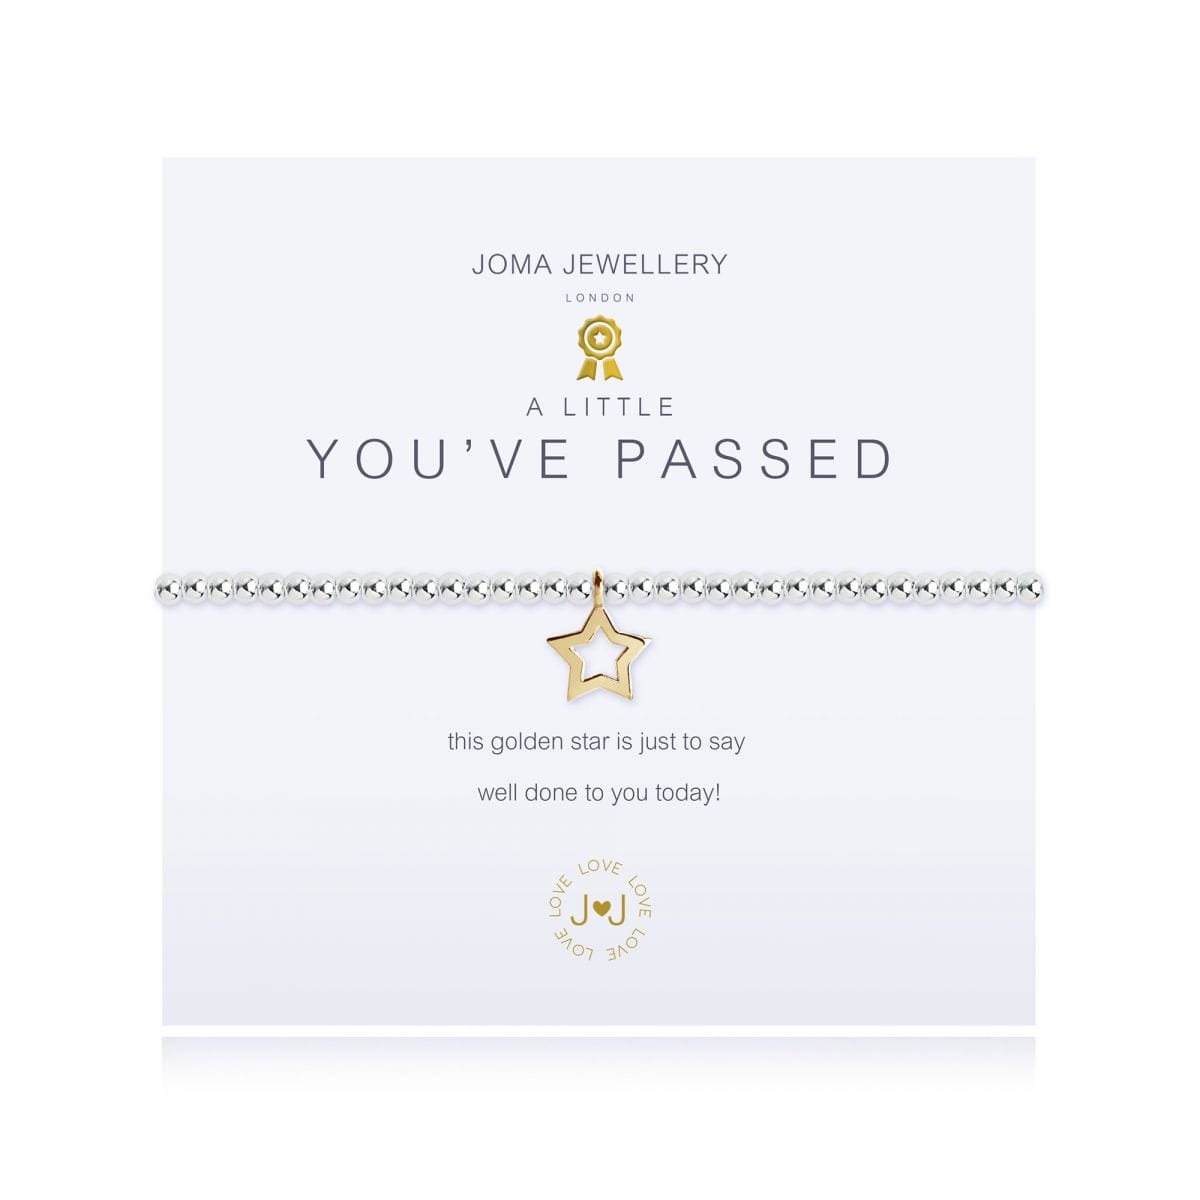 Joma Jewellery Bracelet Joma Jewellery Bracelet - A Little You've Passed